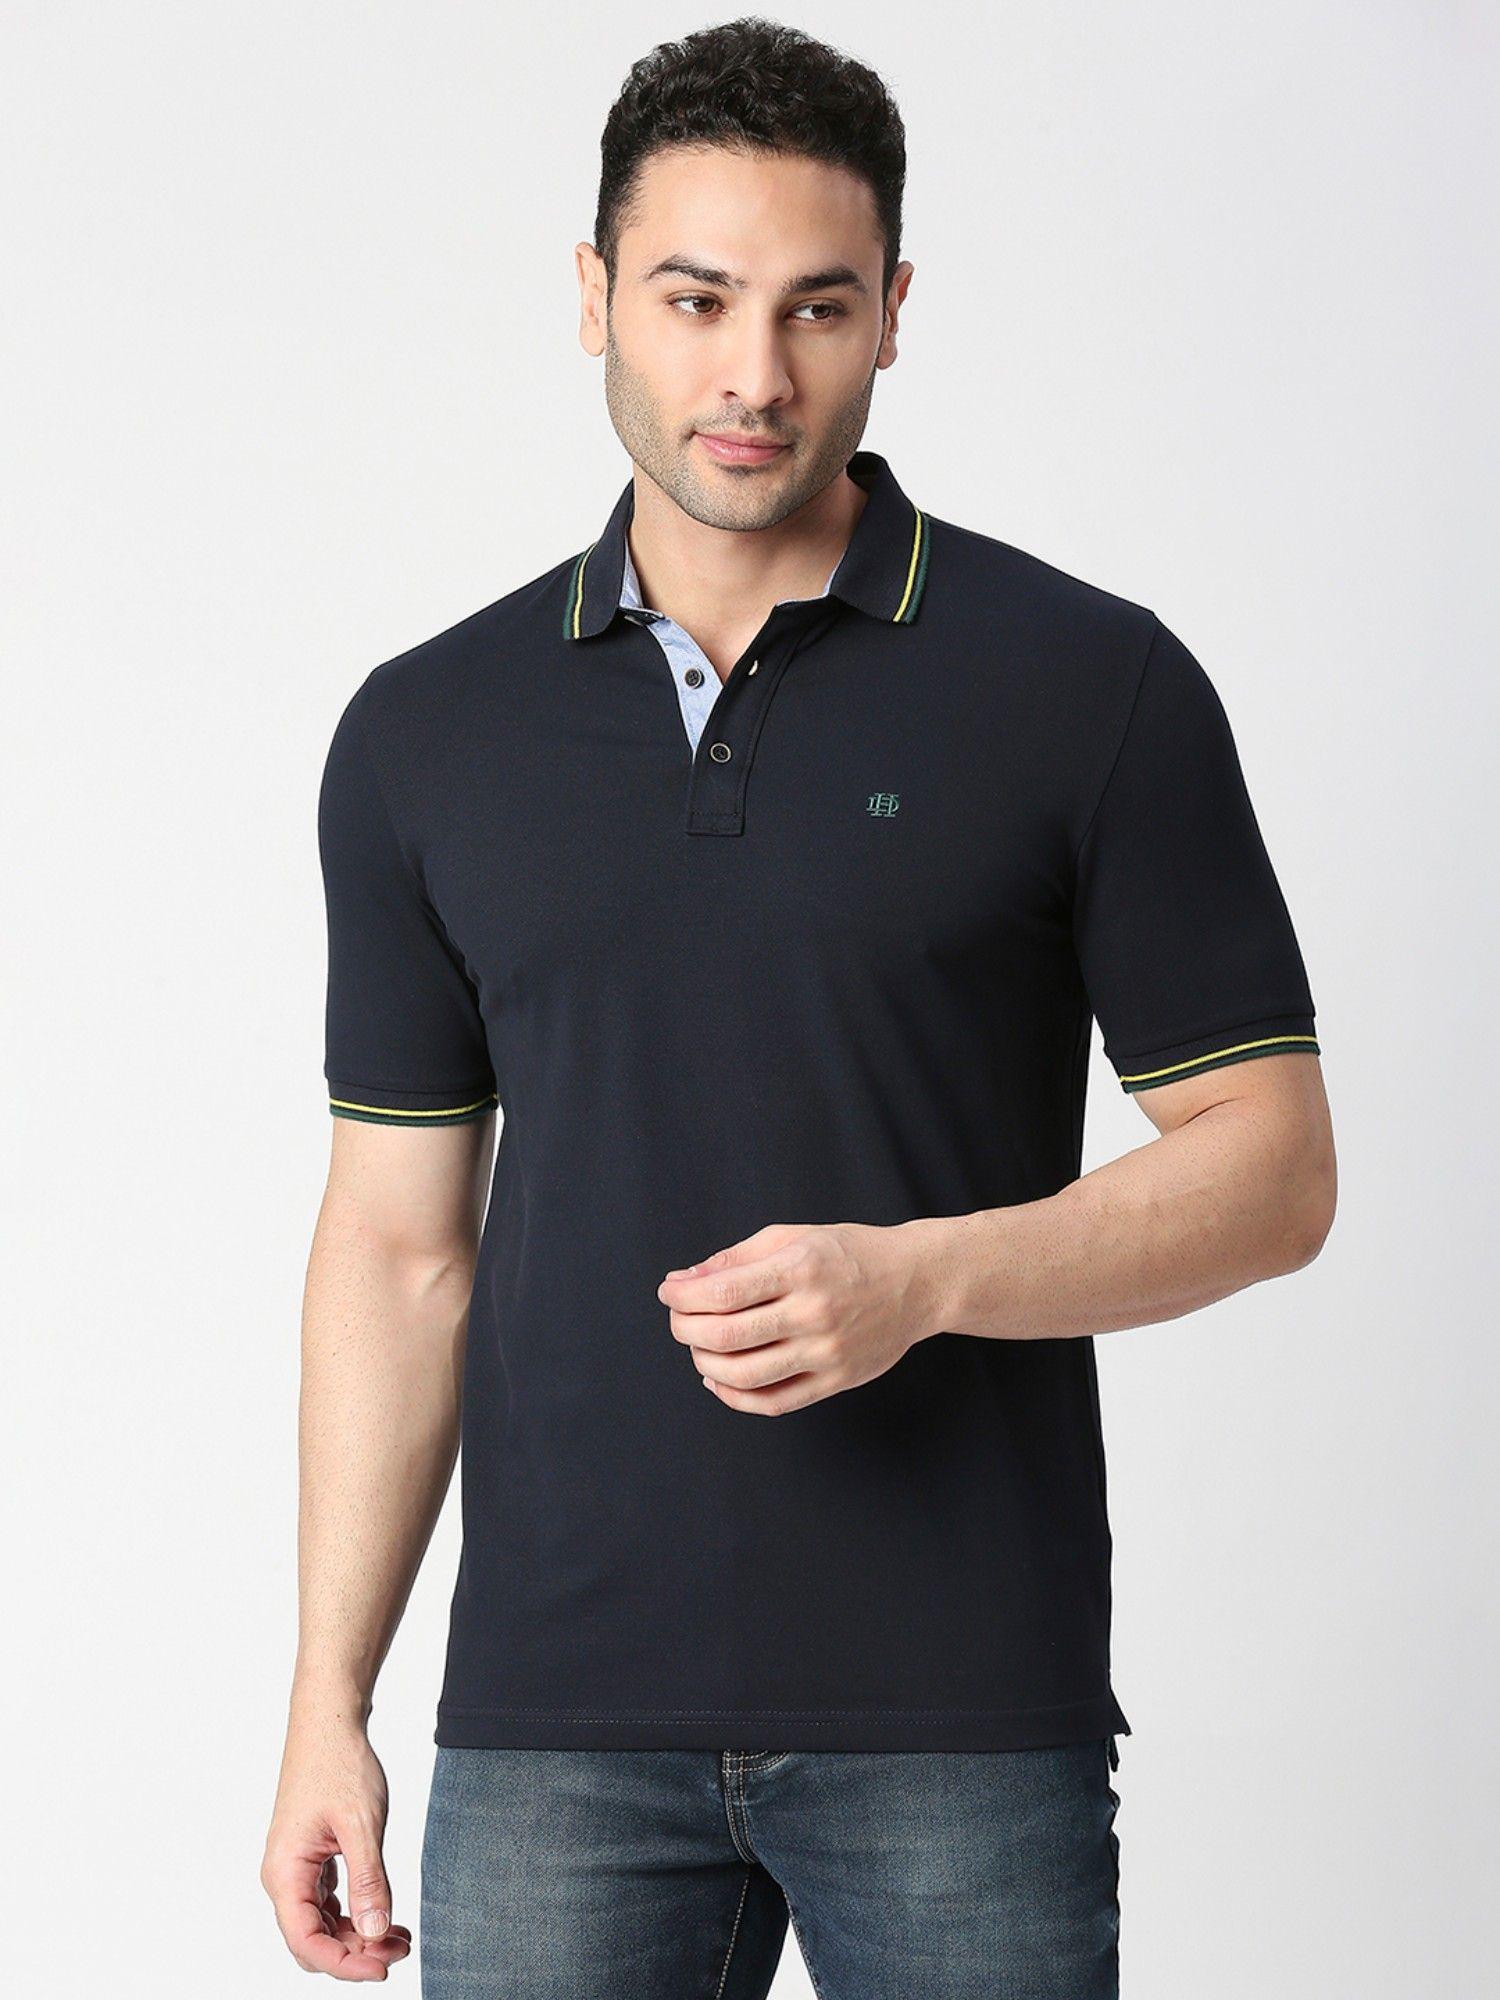 half-sleeves-navy-blue-pique-polo-t-shirt-with-tipping-collar